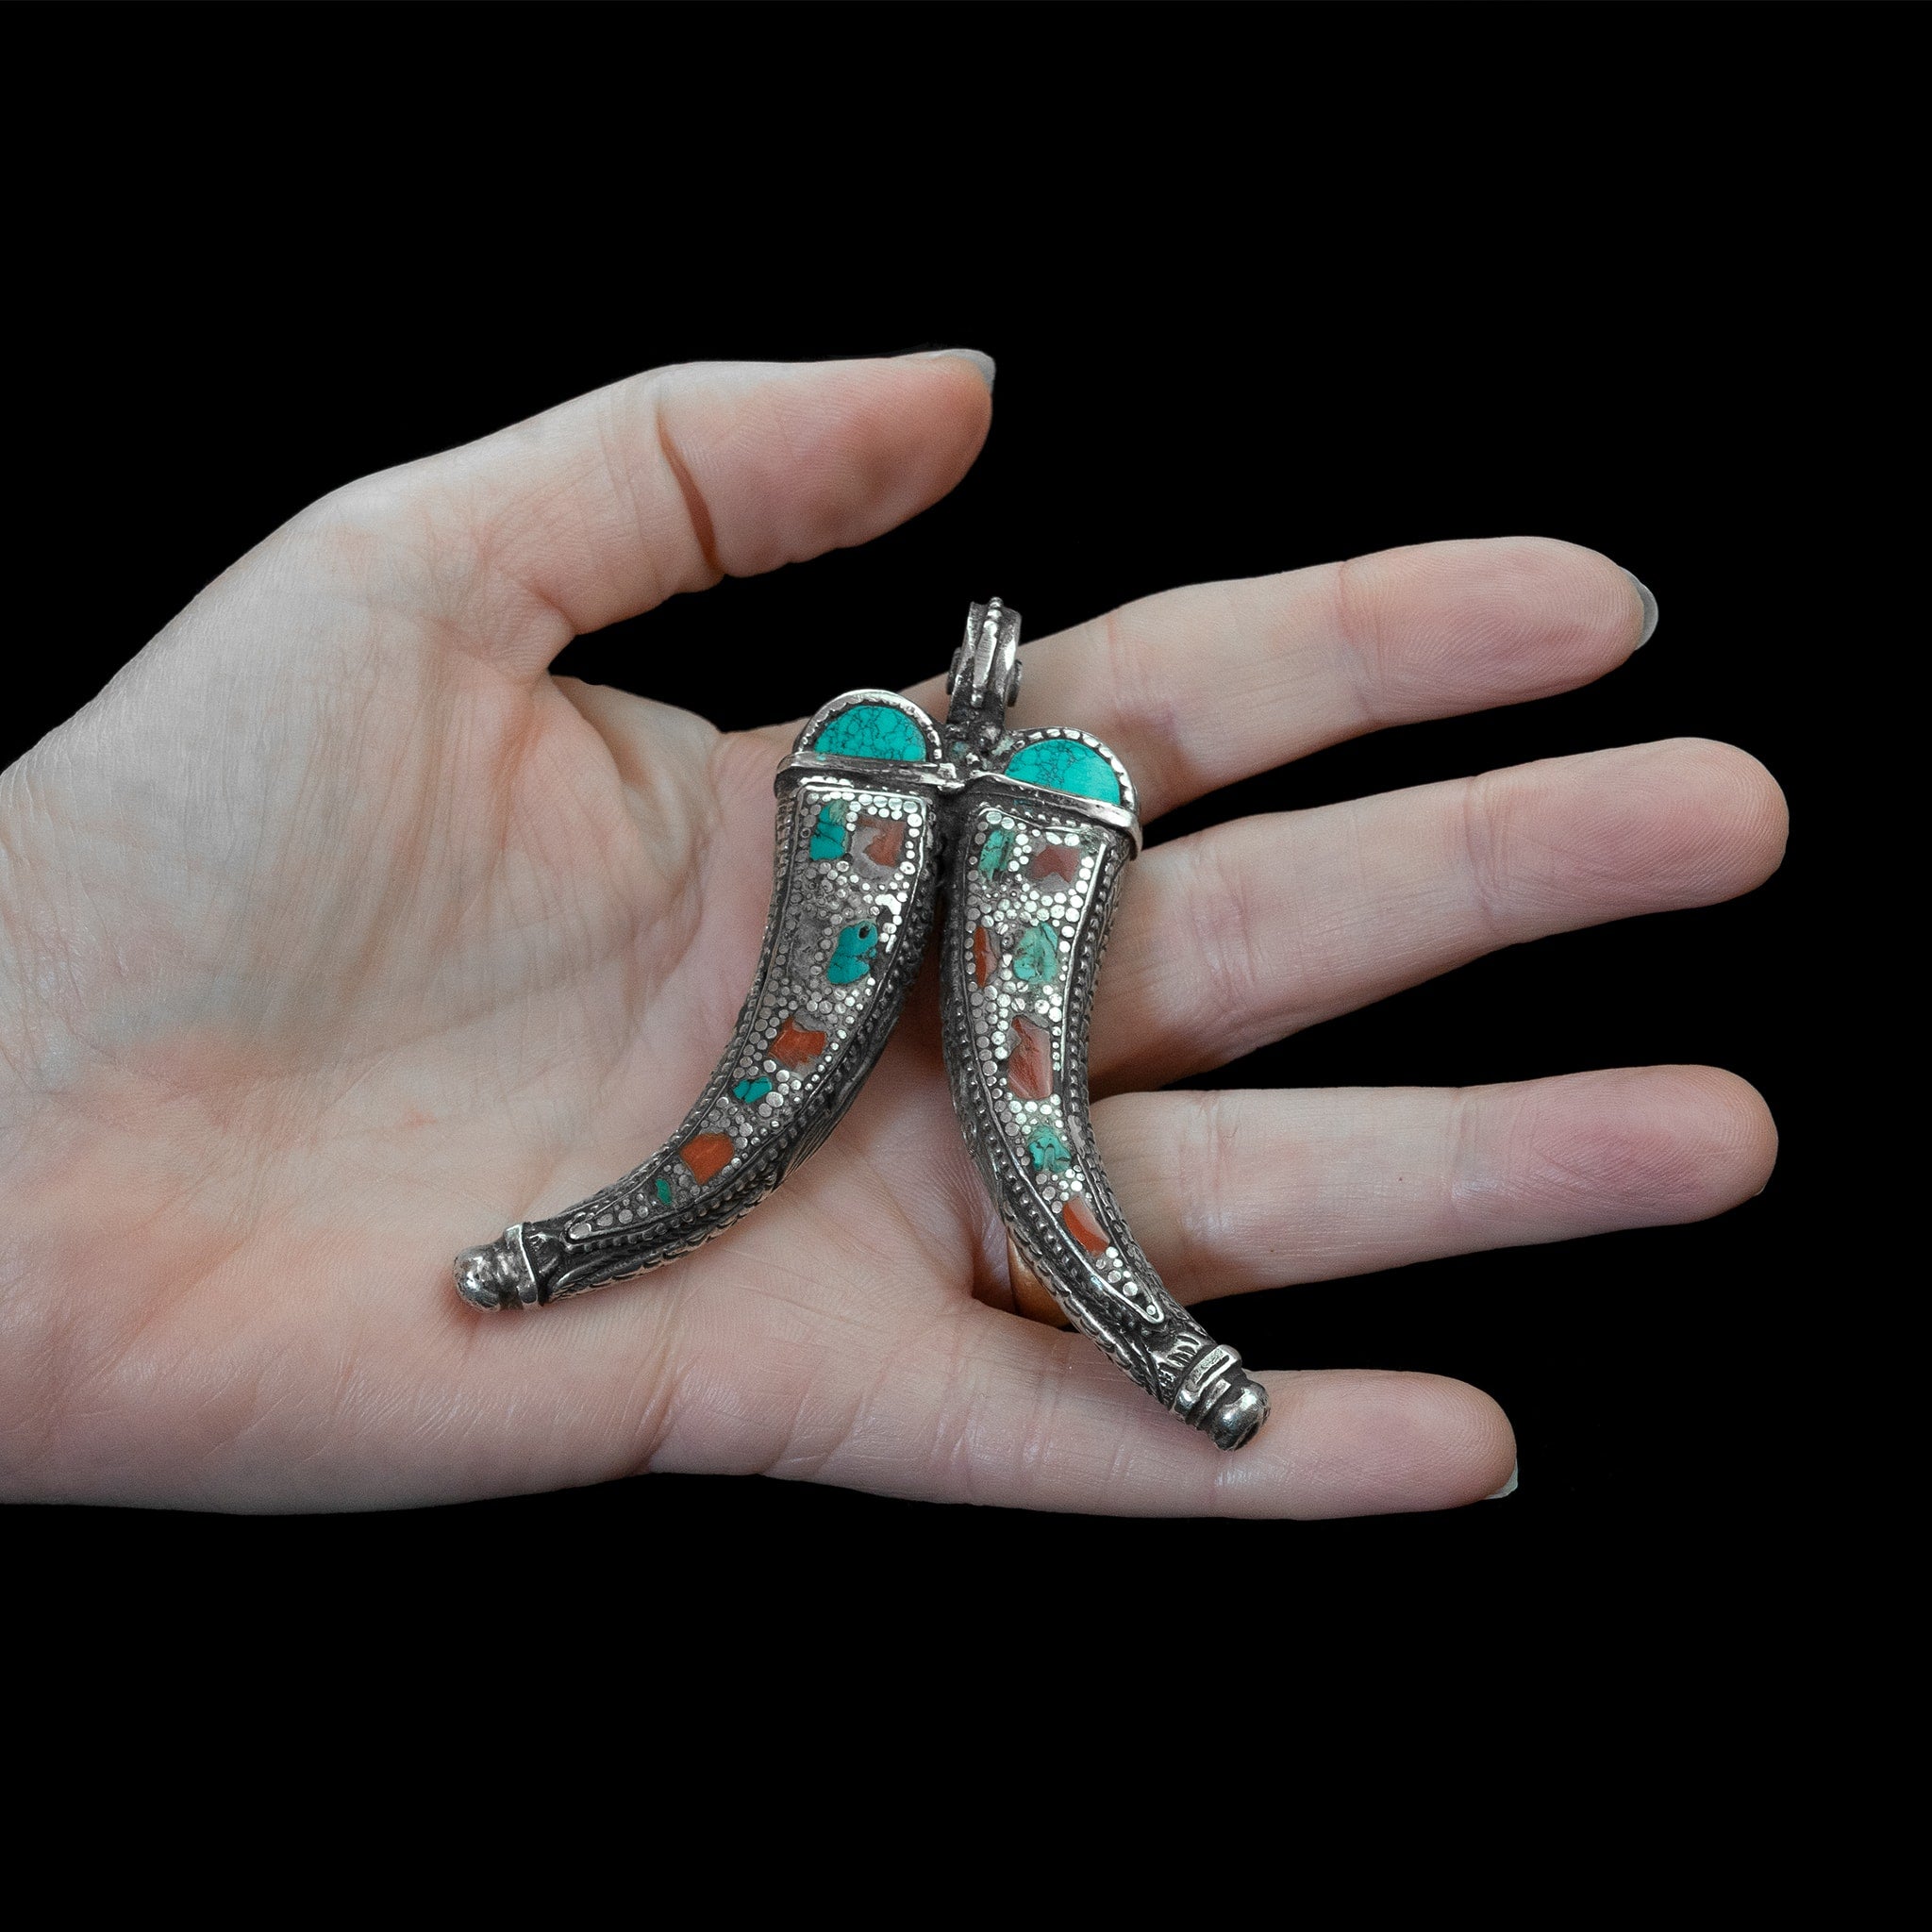 Himalayan Silver, Coral & Turquoise Pendant | Vintage Ethnic Jewellery